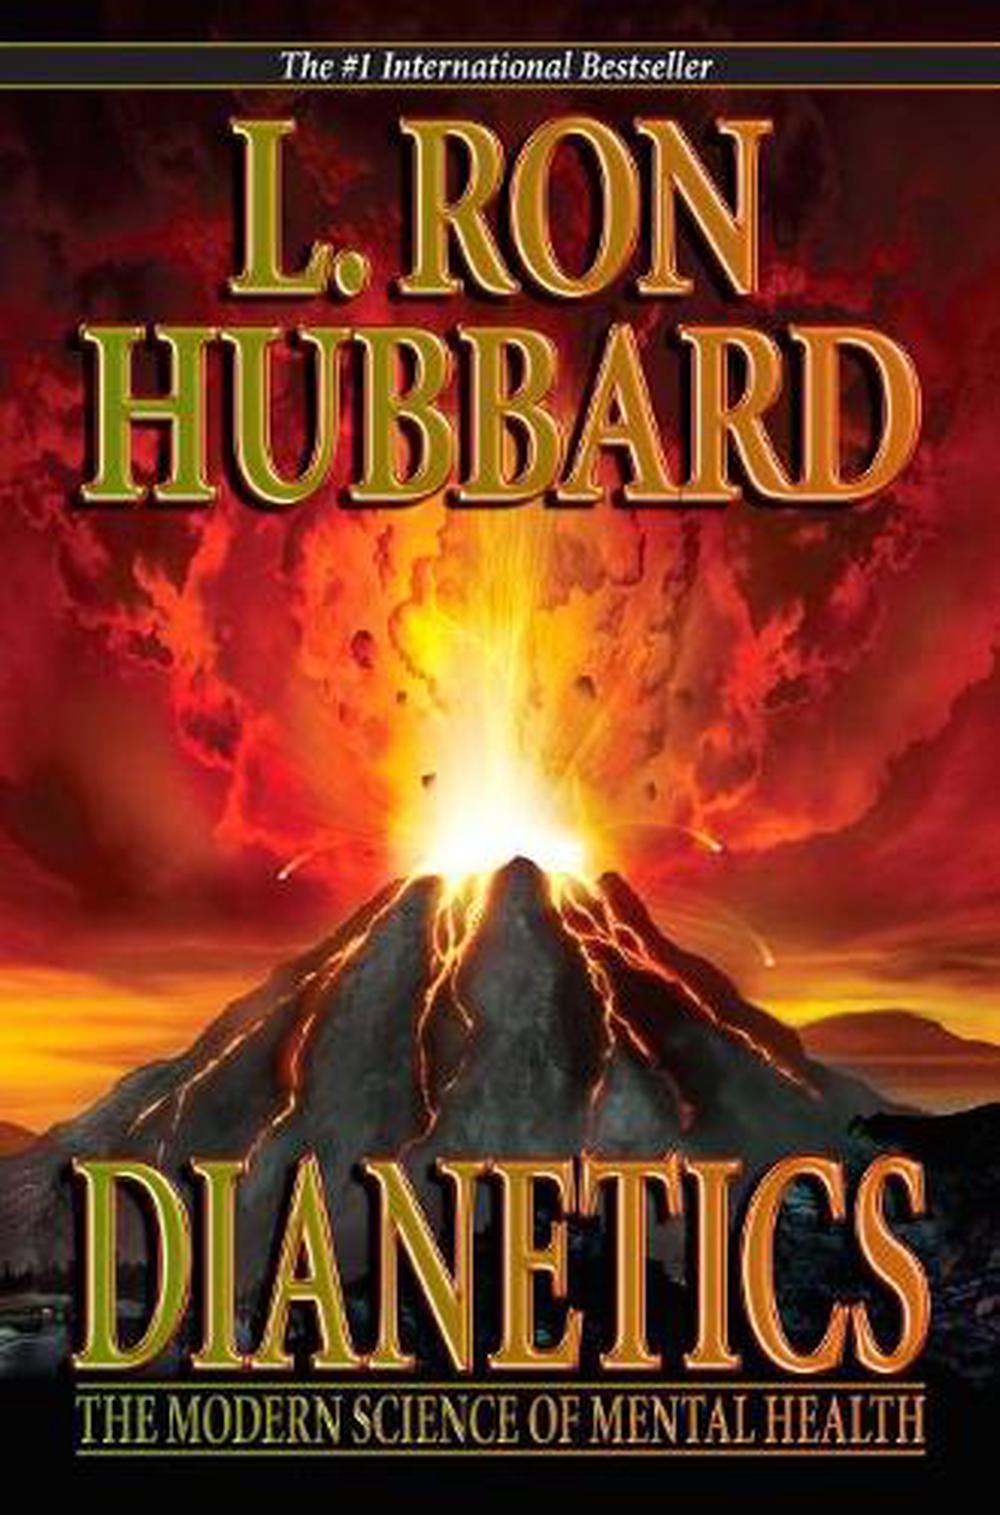 Dianetics By L Ron Hubbard Paperback Book Free Shipping 9788779897717 Ebay